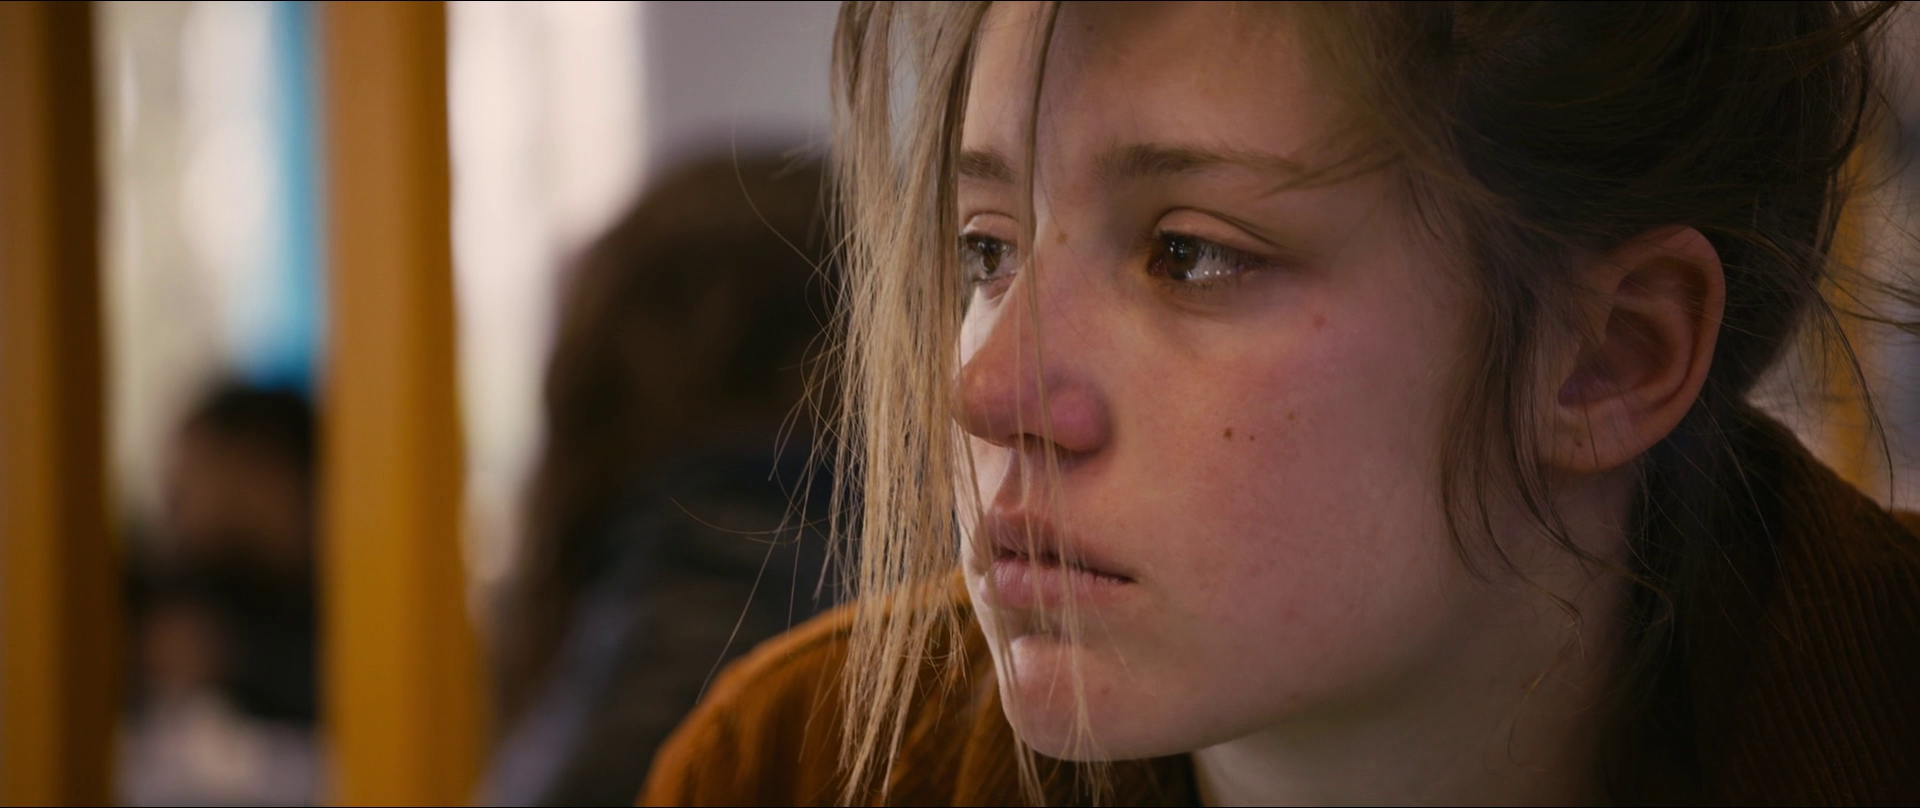  Blue.Is.the.Warmest.Color.2013.1080p.BluRay.x264-PSYCHD 12.03GB-6.png